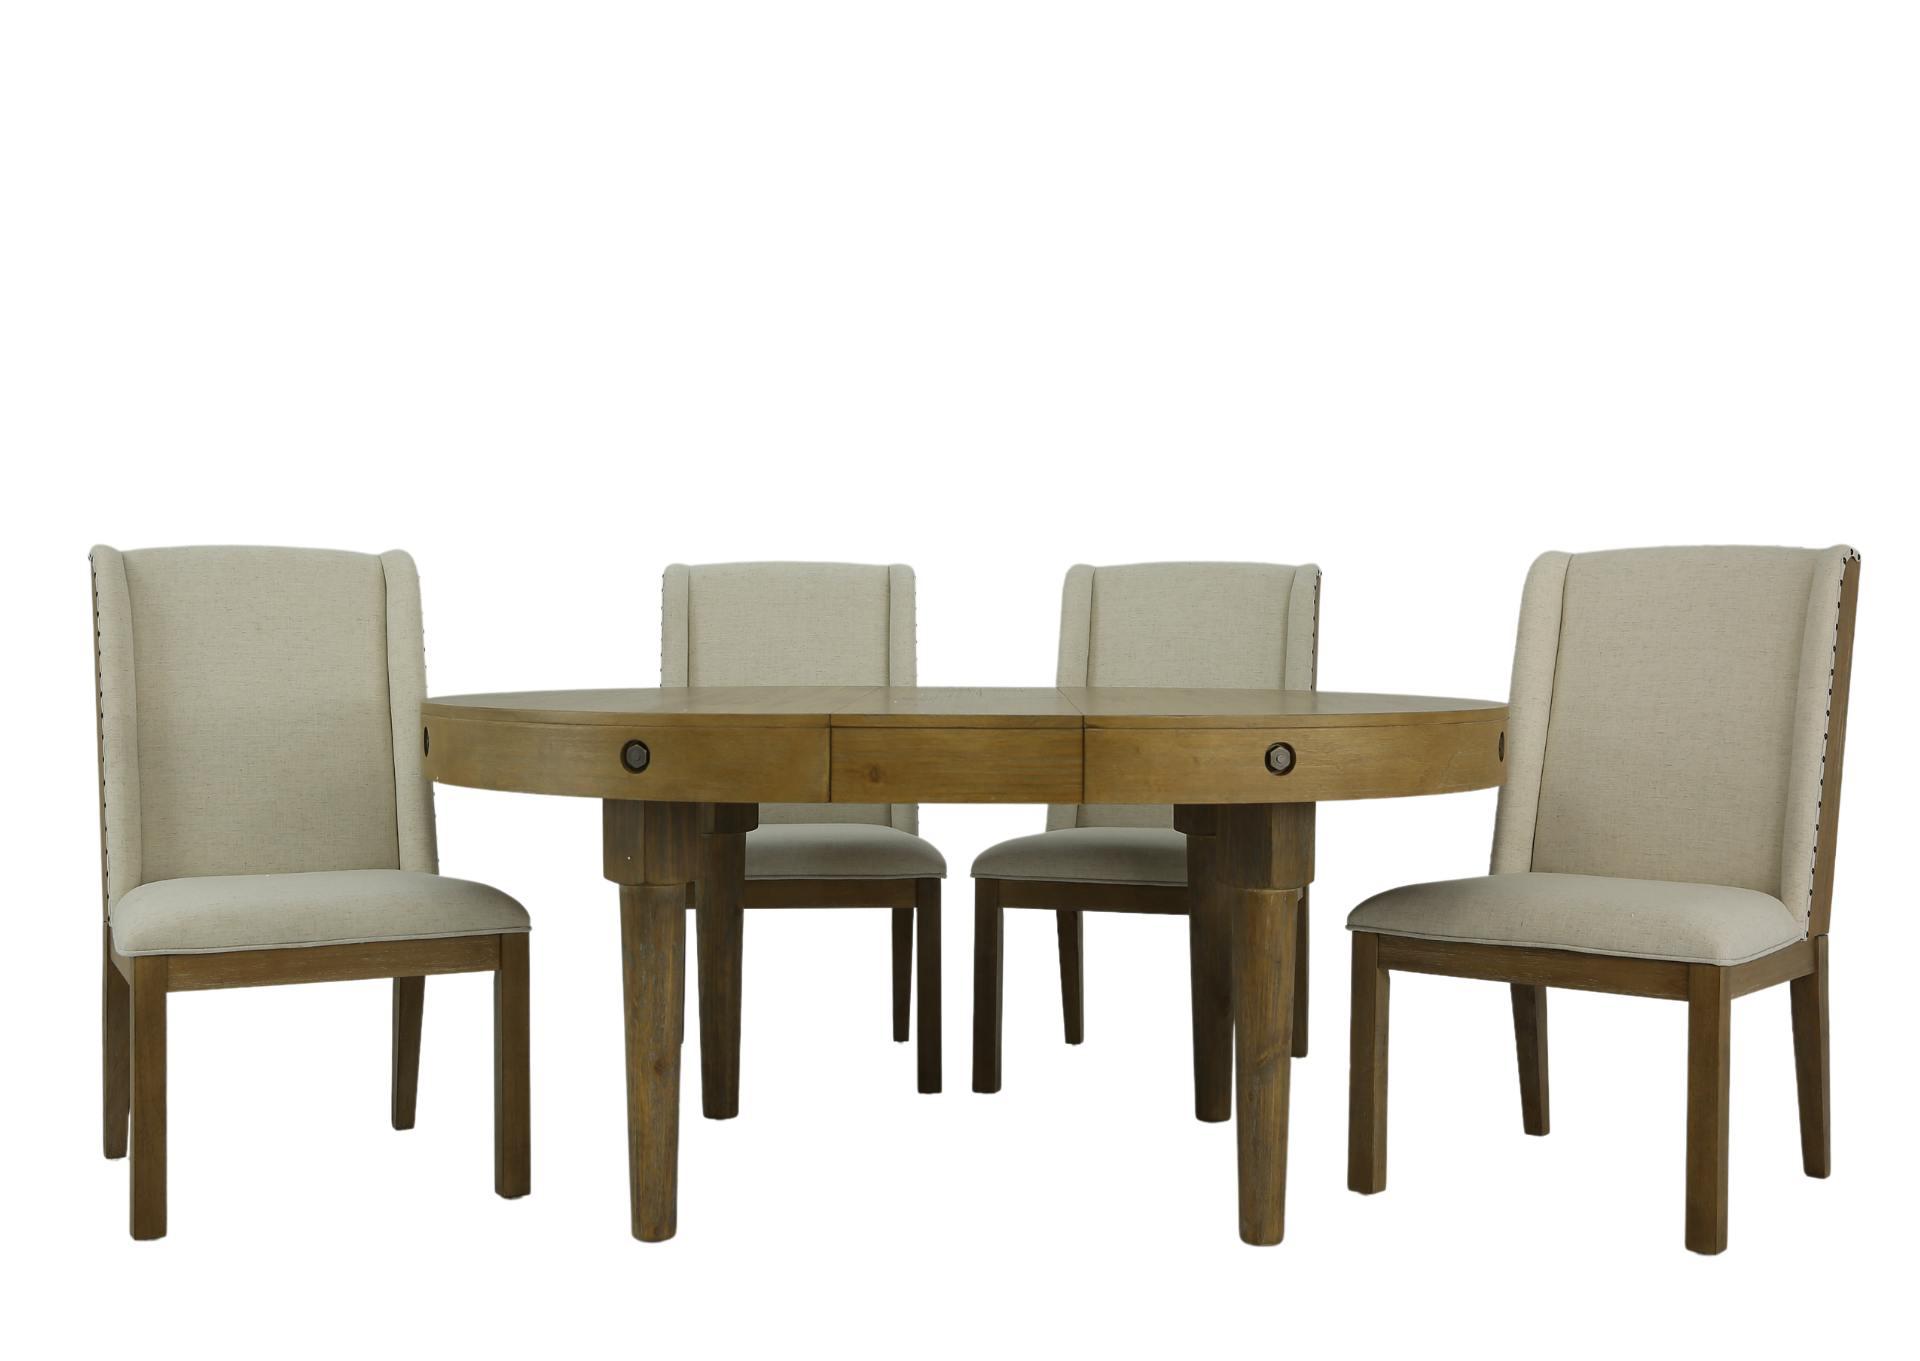 LYNNFIELD 5 PIECE DINING SET,MAGS